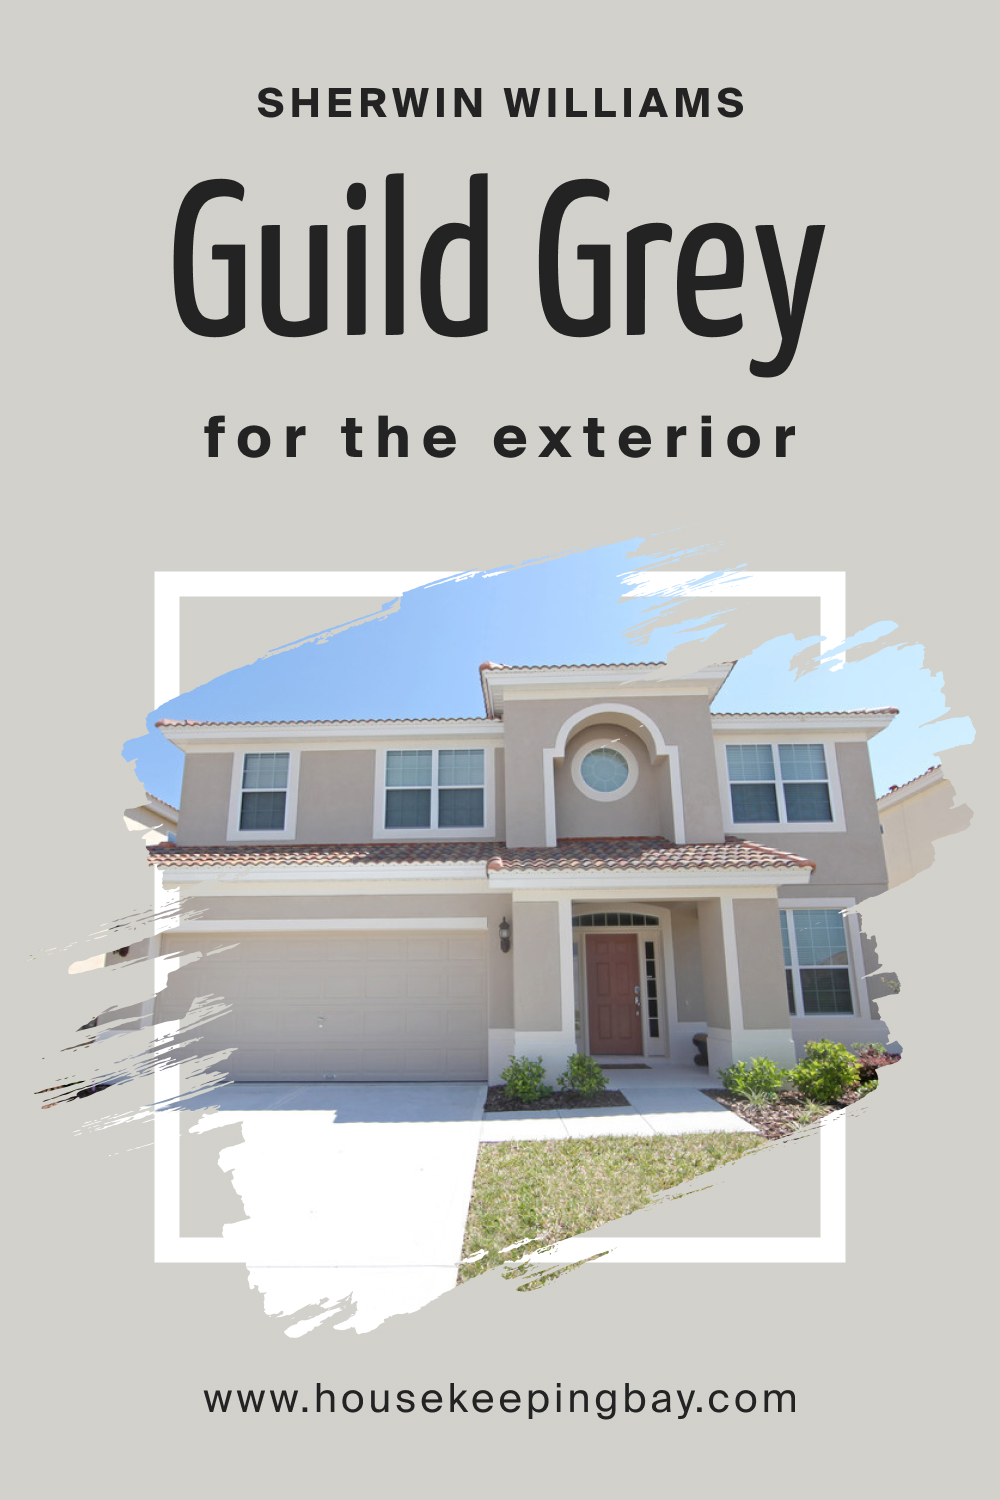 Sherwin Williams. SW 9561 Guild Grey For the exterior